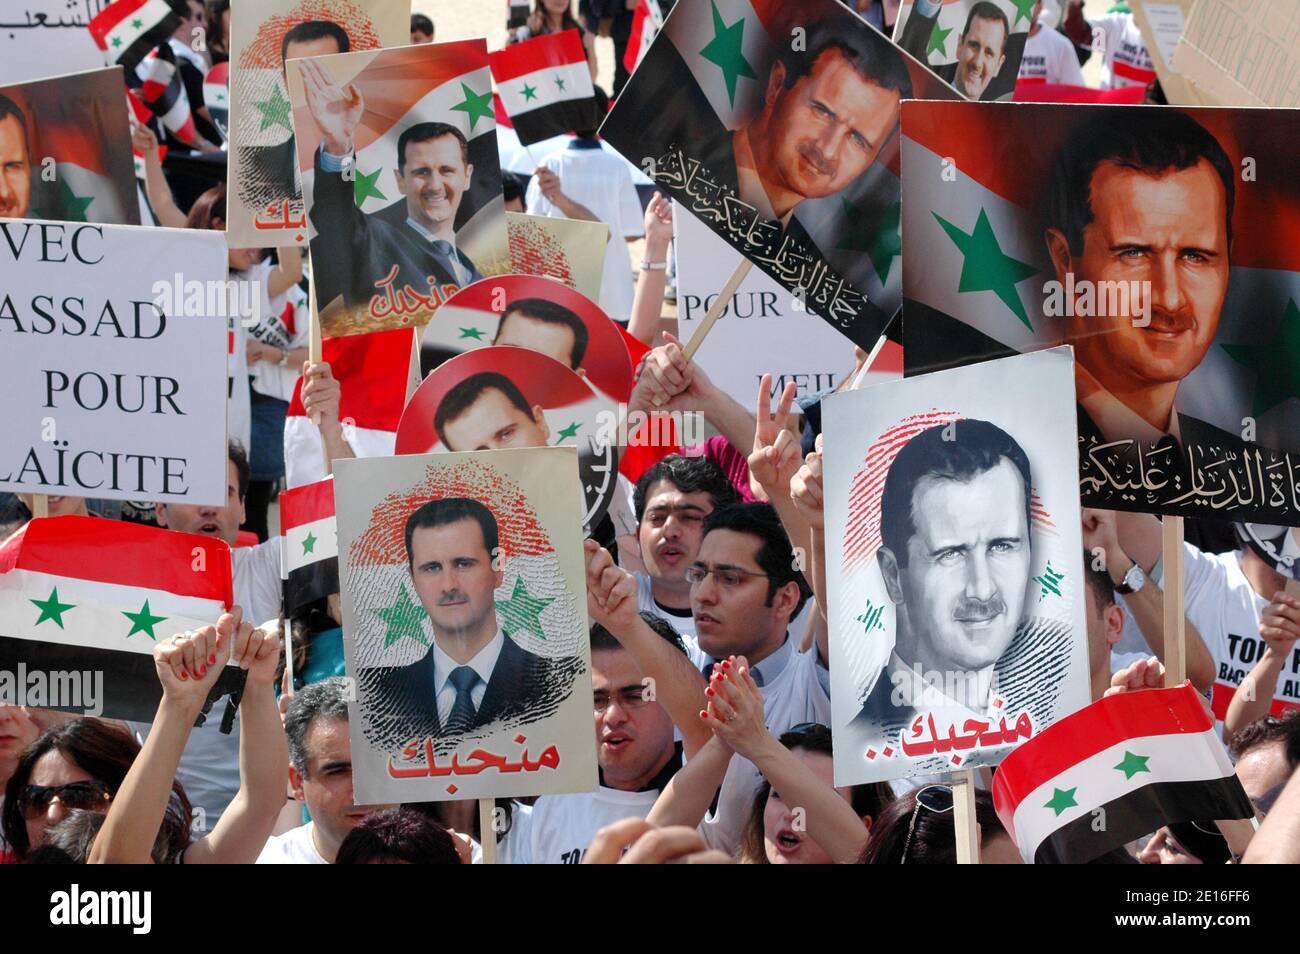 Pro Bachar Al-Assad supporters demonstrate at the Champ de Mars in Paris, France, May 8, 2011, as Syrian security forces have moved into parts of the city of Homs, a centre of the nationwide protests against President Bashar al-Assad. Photo by Alain Apaydin/ABACAPRESS.COM Stock Photo